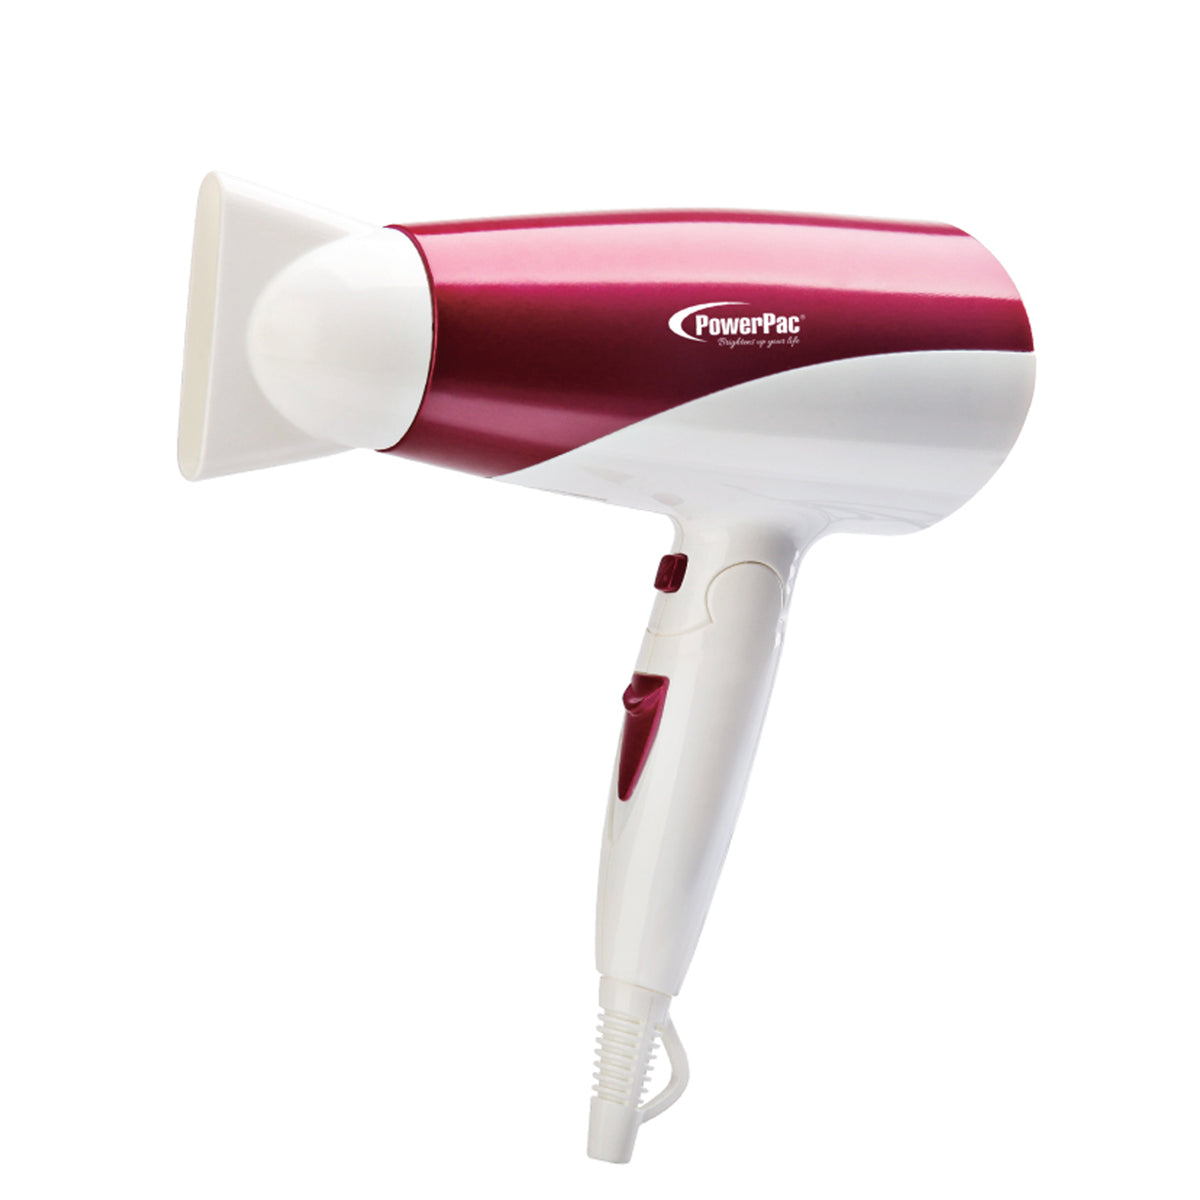 Turbo Hair Dryer with cool air 1600W (PPH1600) - PowerPacSG